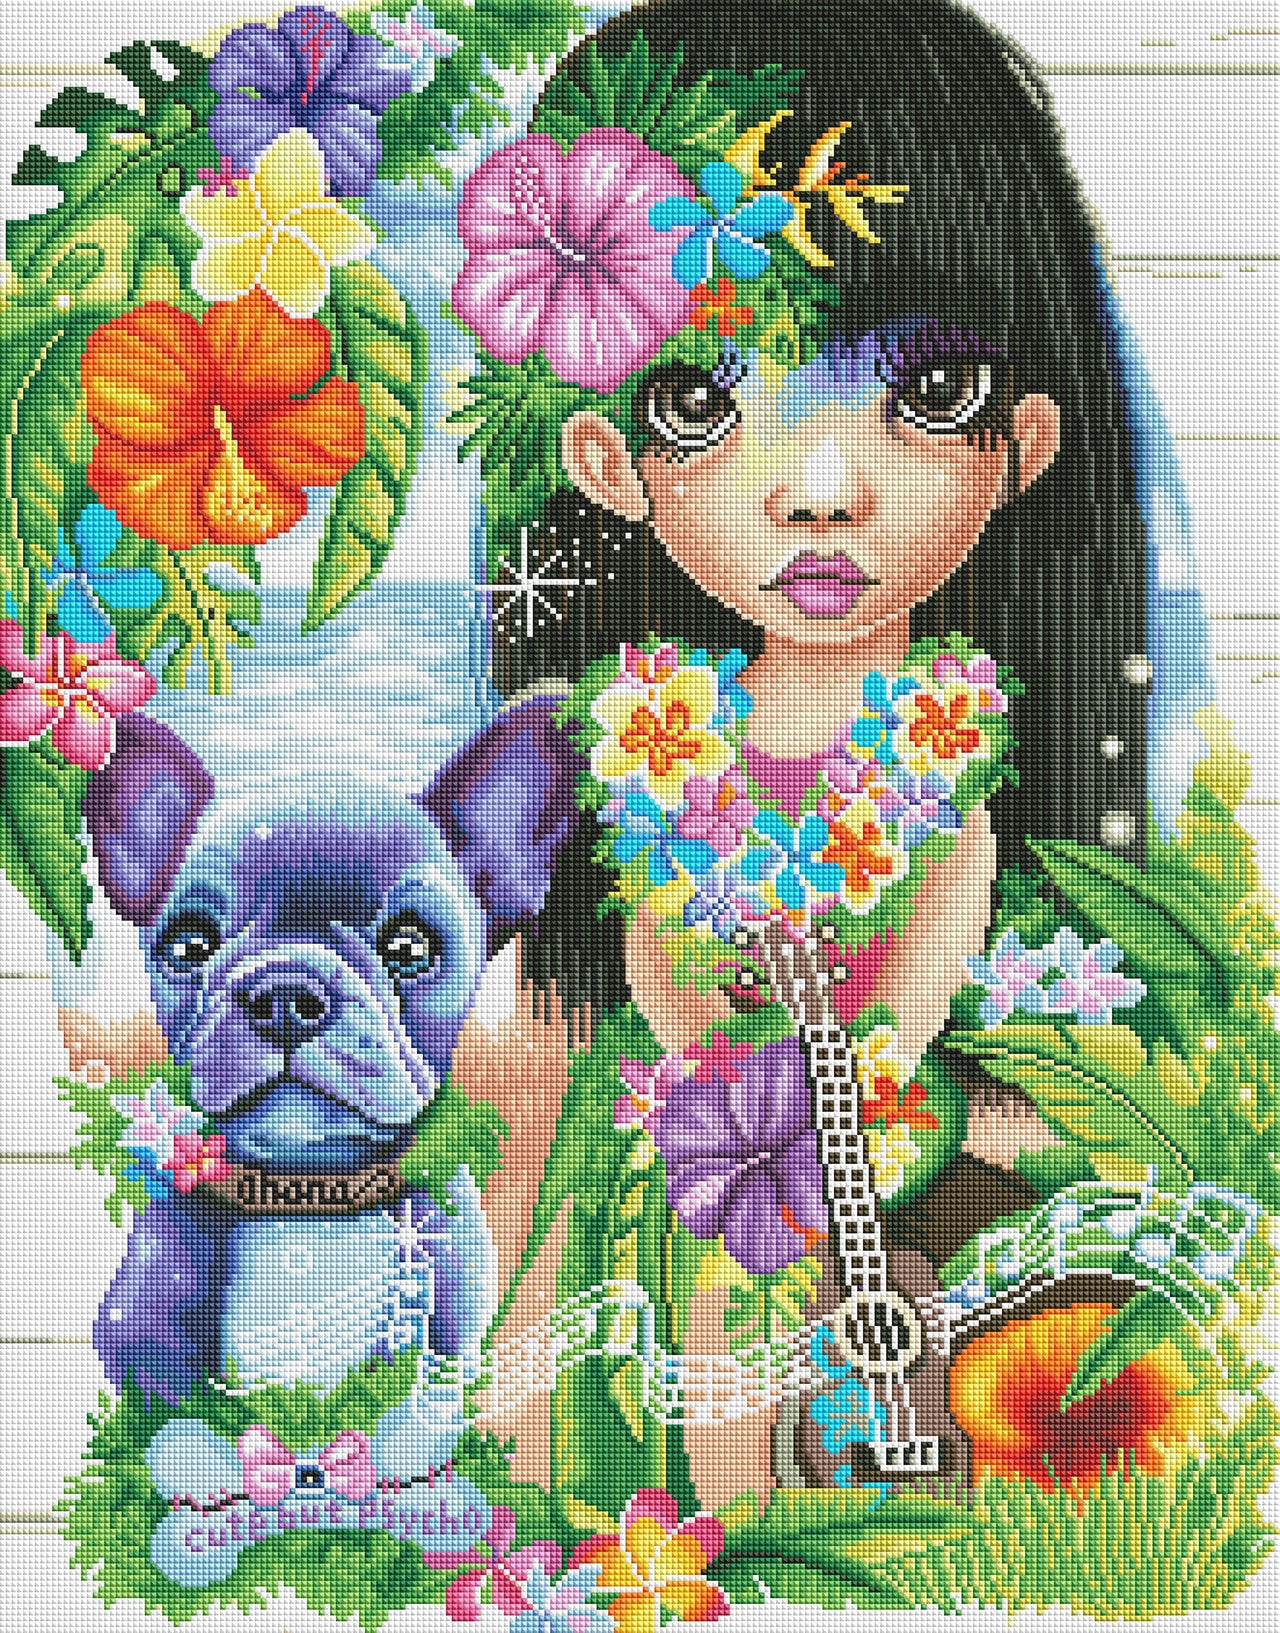 Diamond Painting A Hawaiian Girl And Her Dog 22" x 28″ (56cm x 71cm) / Square with 63 Colors including 3 ABs / 62,322